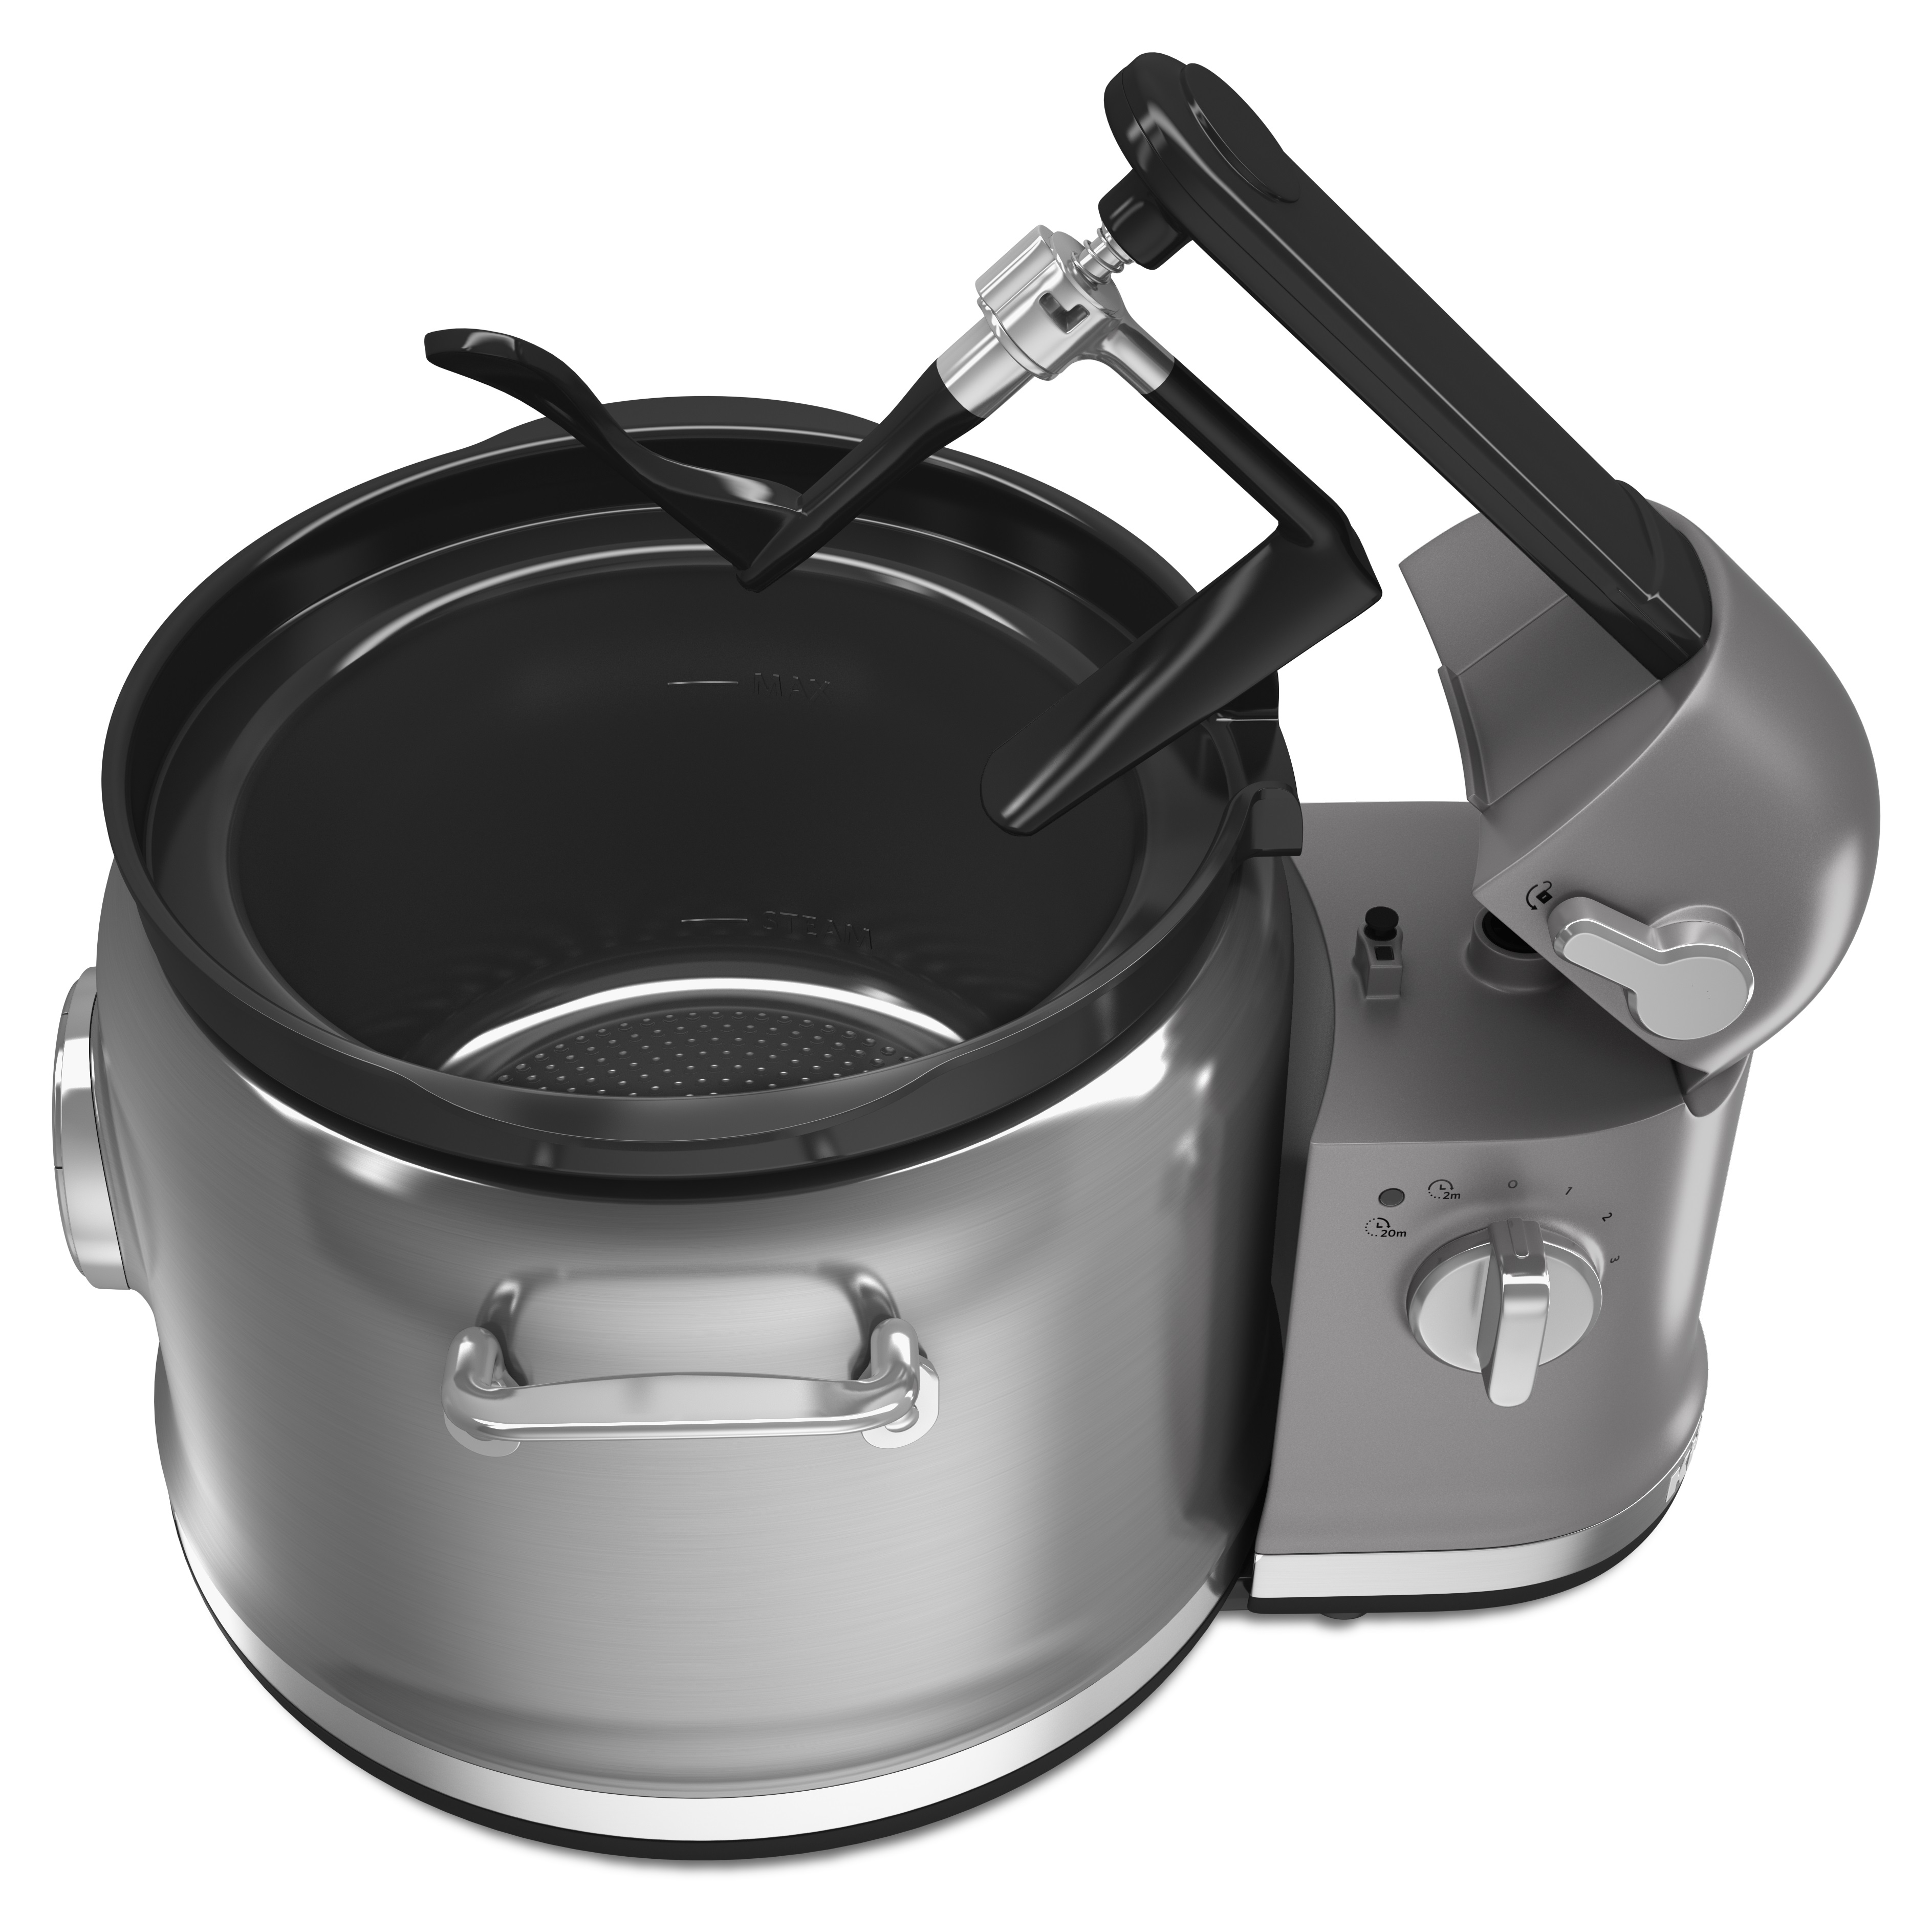 KitchenAid Multi-Cooker Offers Cooks Extra Help - Kitchenware News